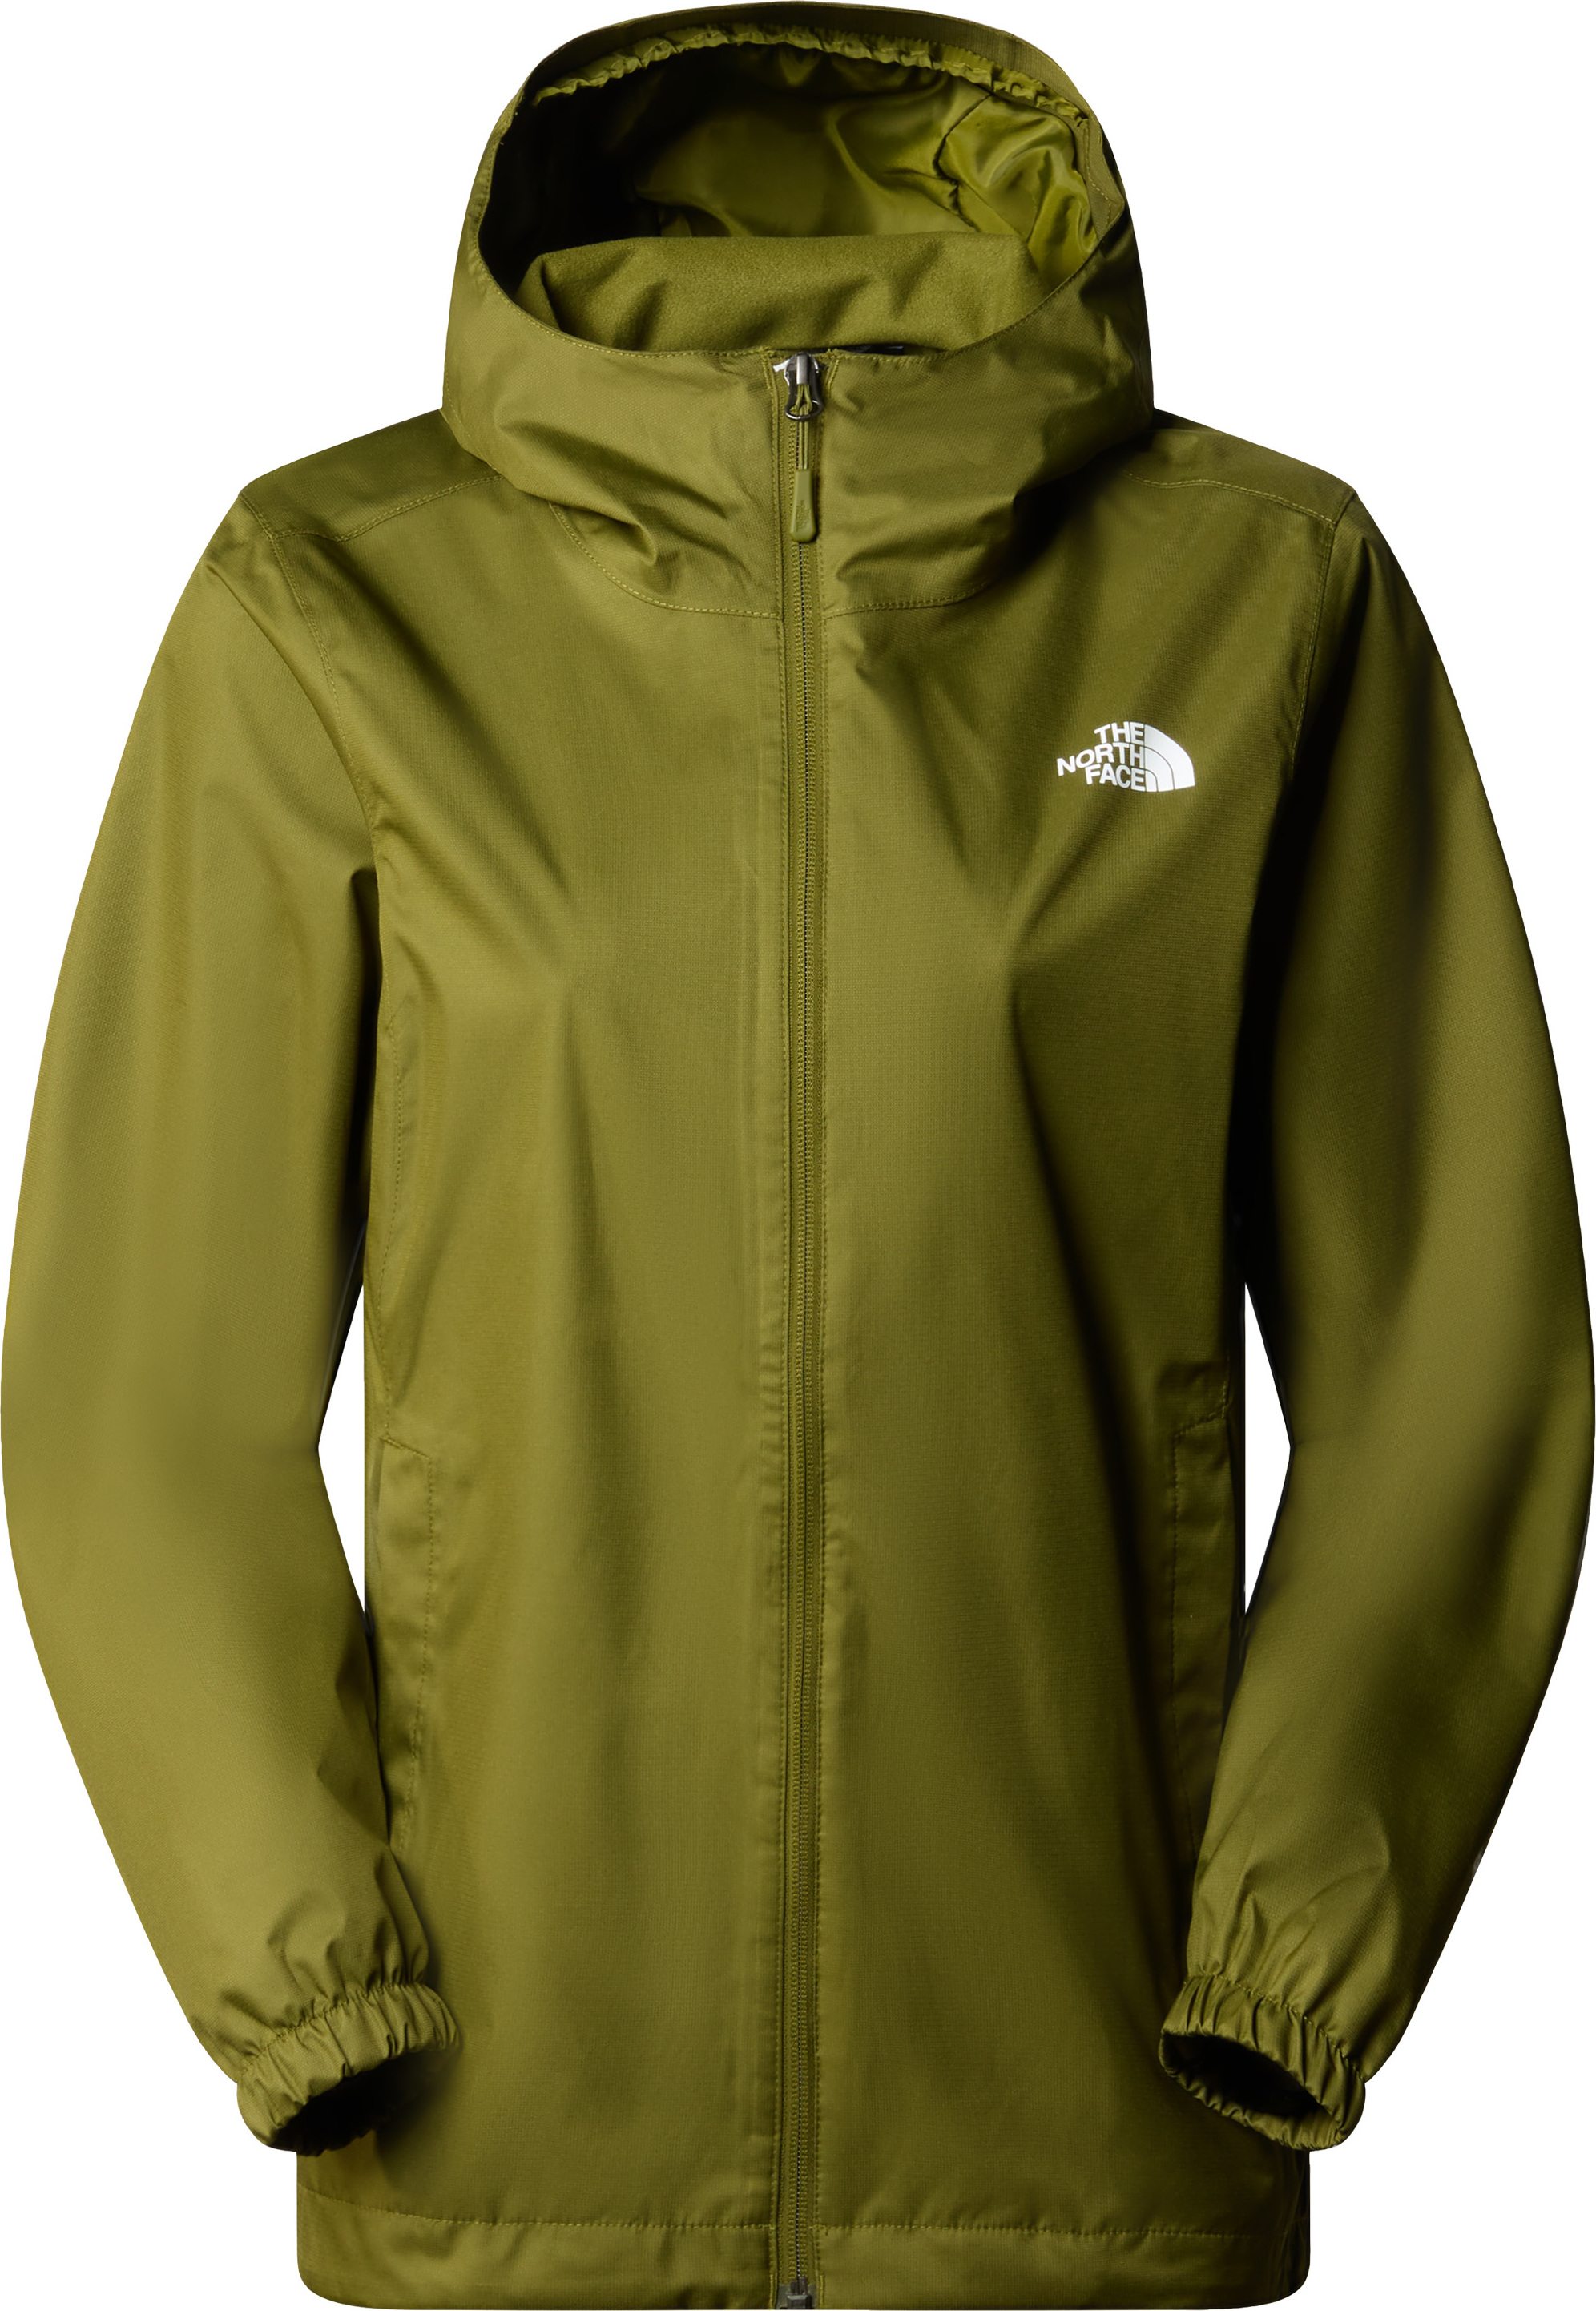 The North Face Women’s Quest Jacket Forest Olive